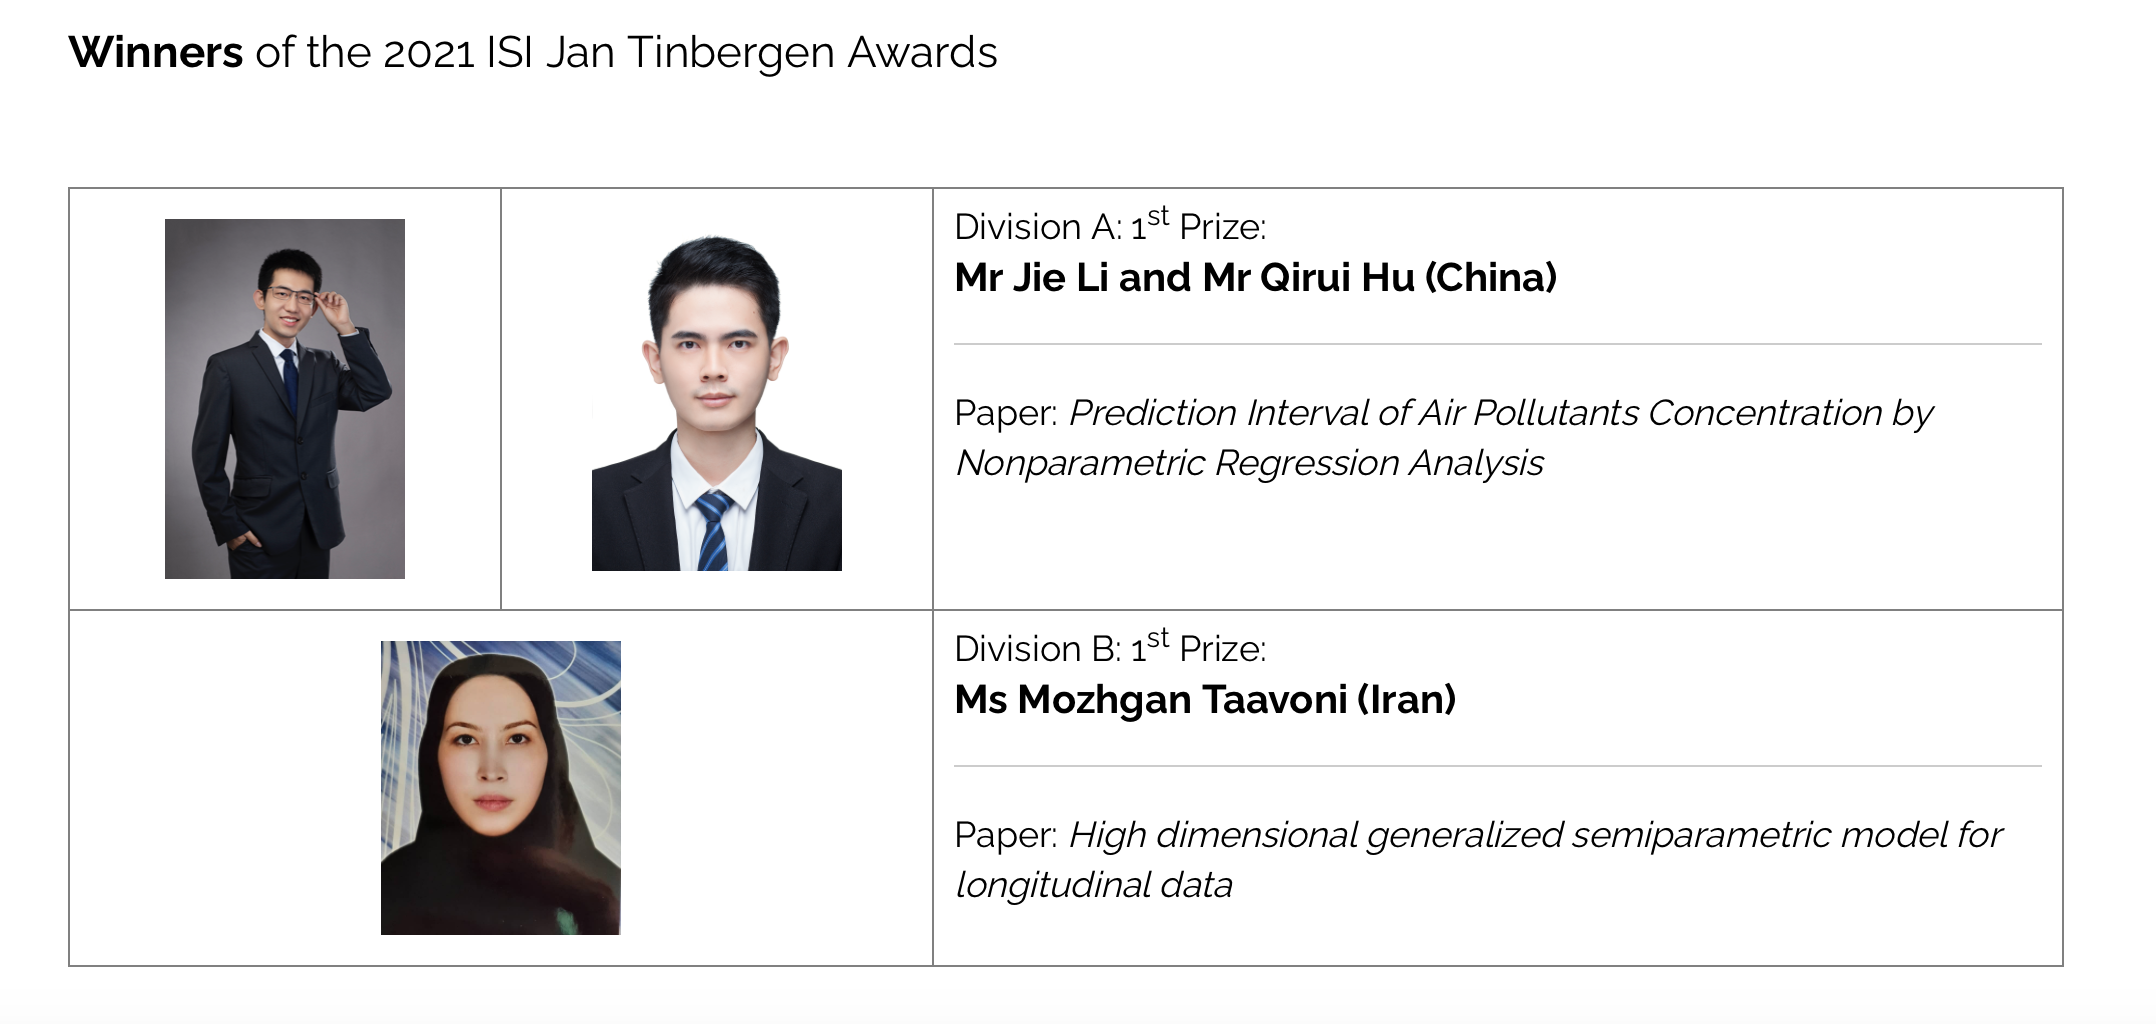 PHD Students of Our Center Won the “2021 ISI Jan Tinbergen Award” of the International Statistical Institute